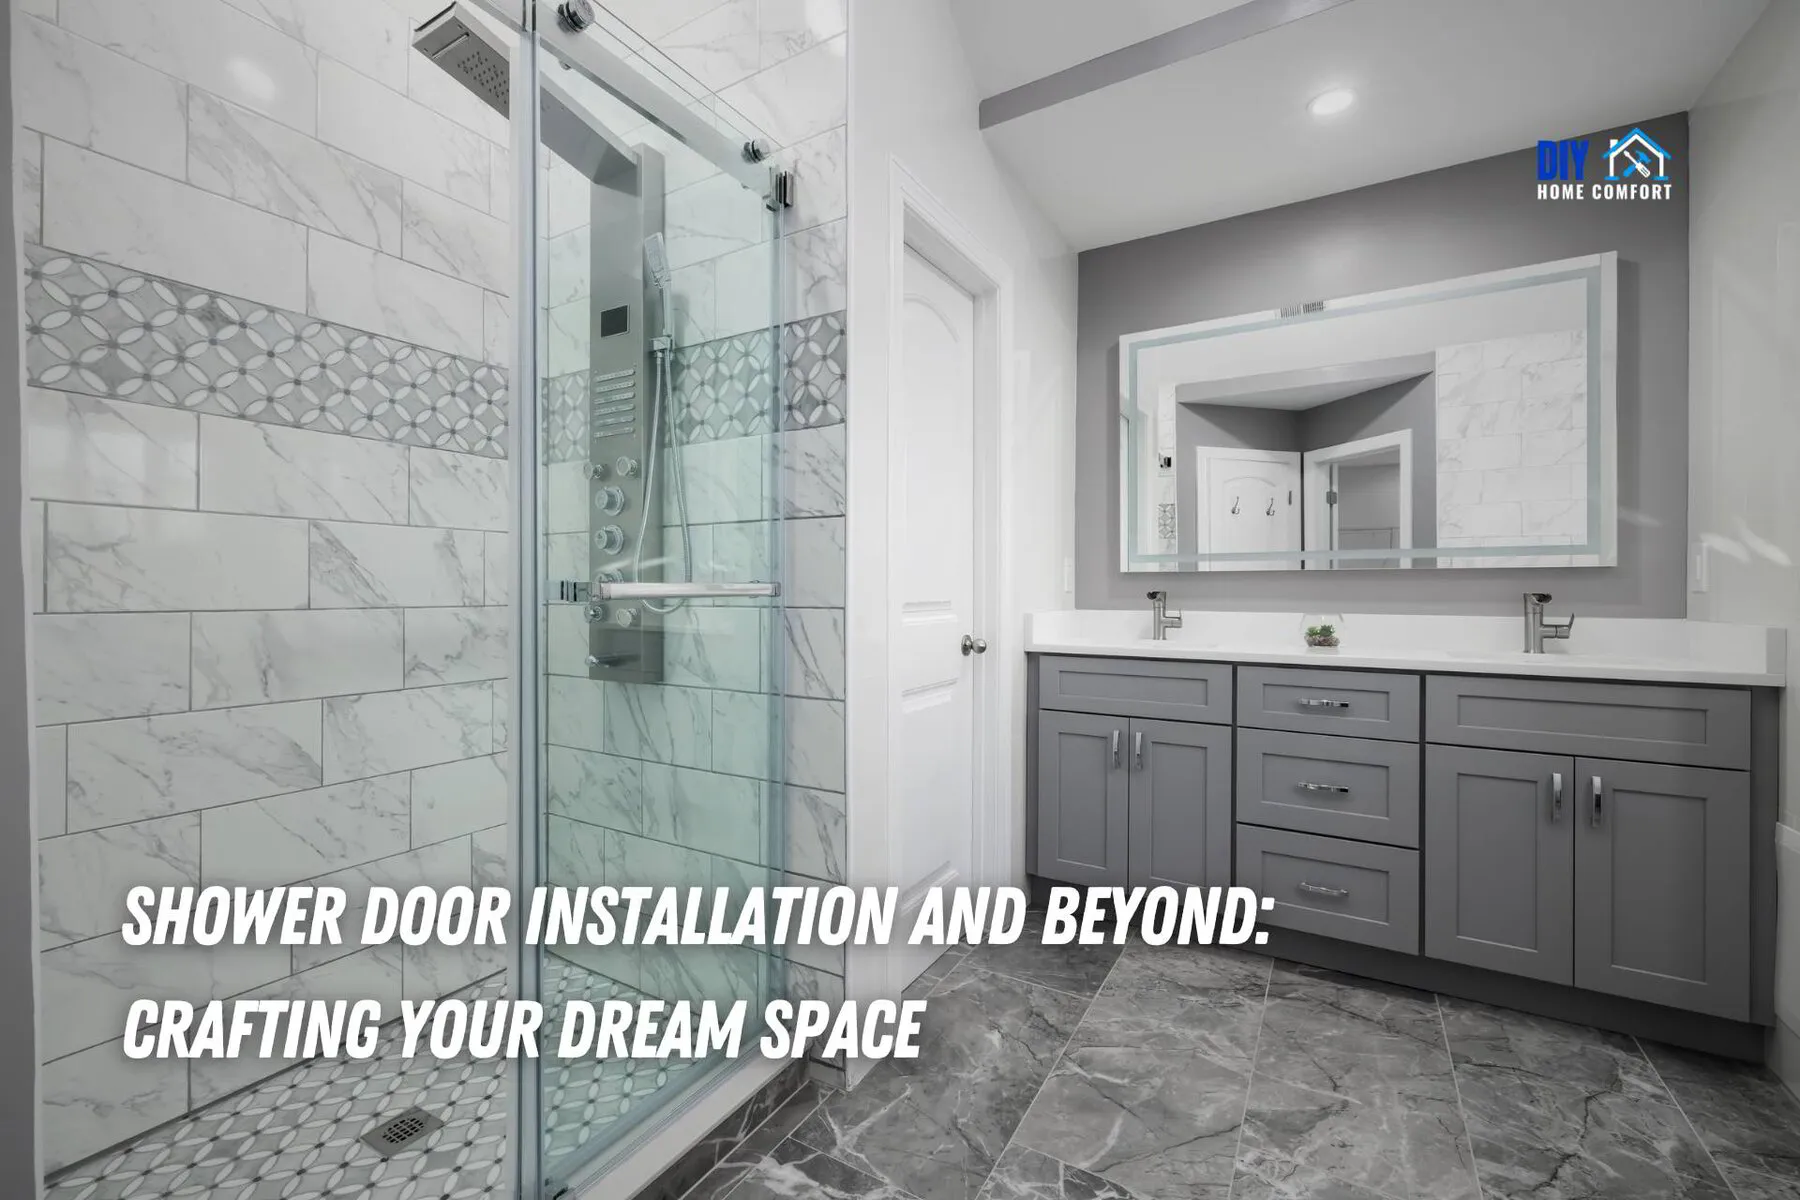 Shower Door Installation and Beyond: Crafting Your Dream Space | DIY Home Comfort